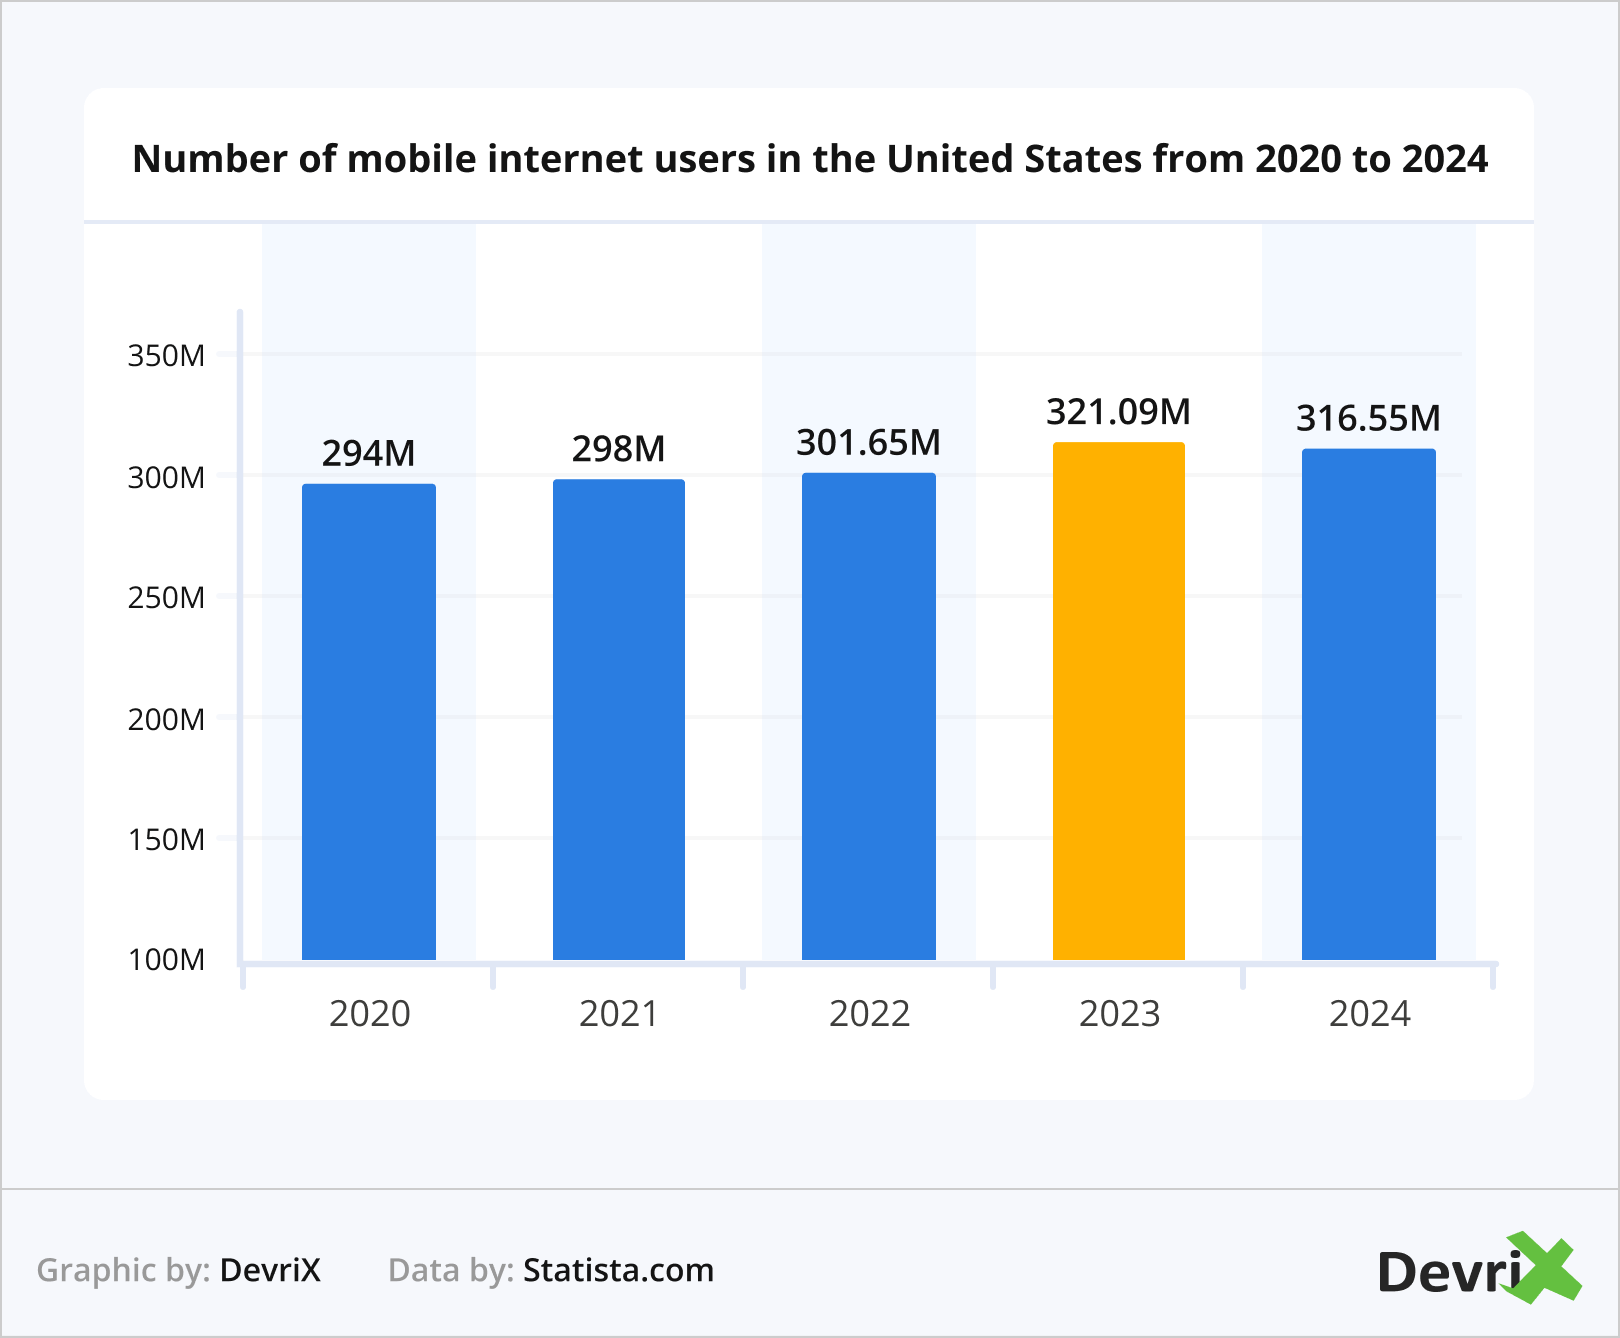 Number of mobile internet users in the United States from 2020 to 2024